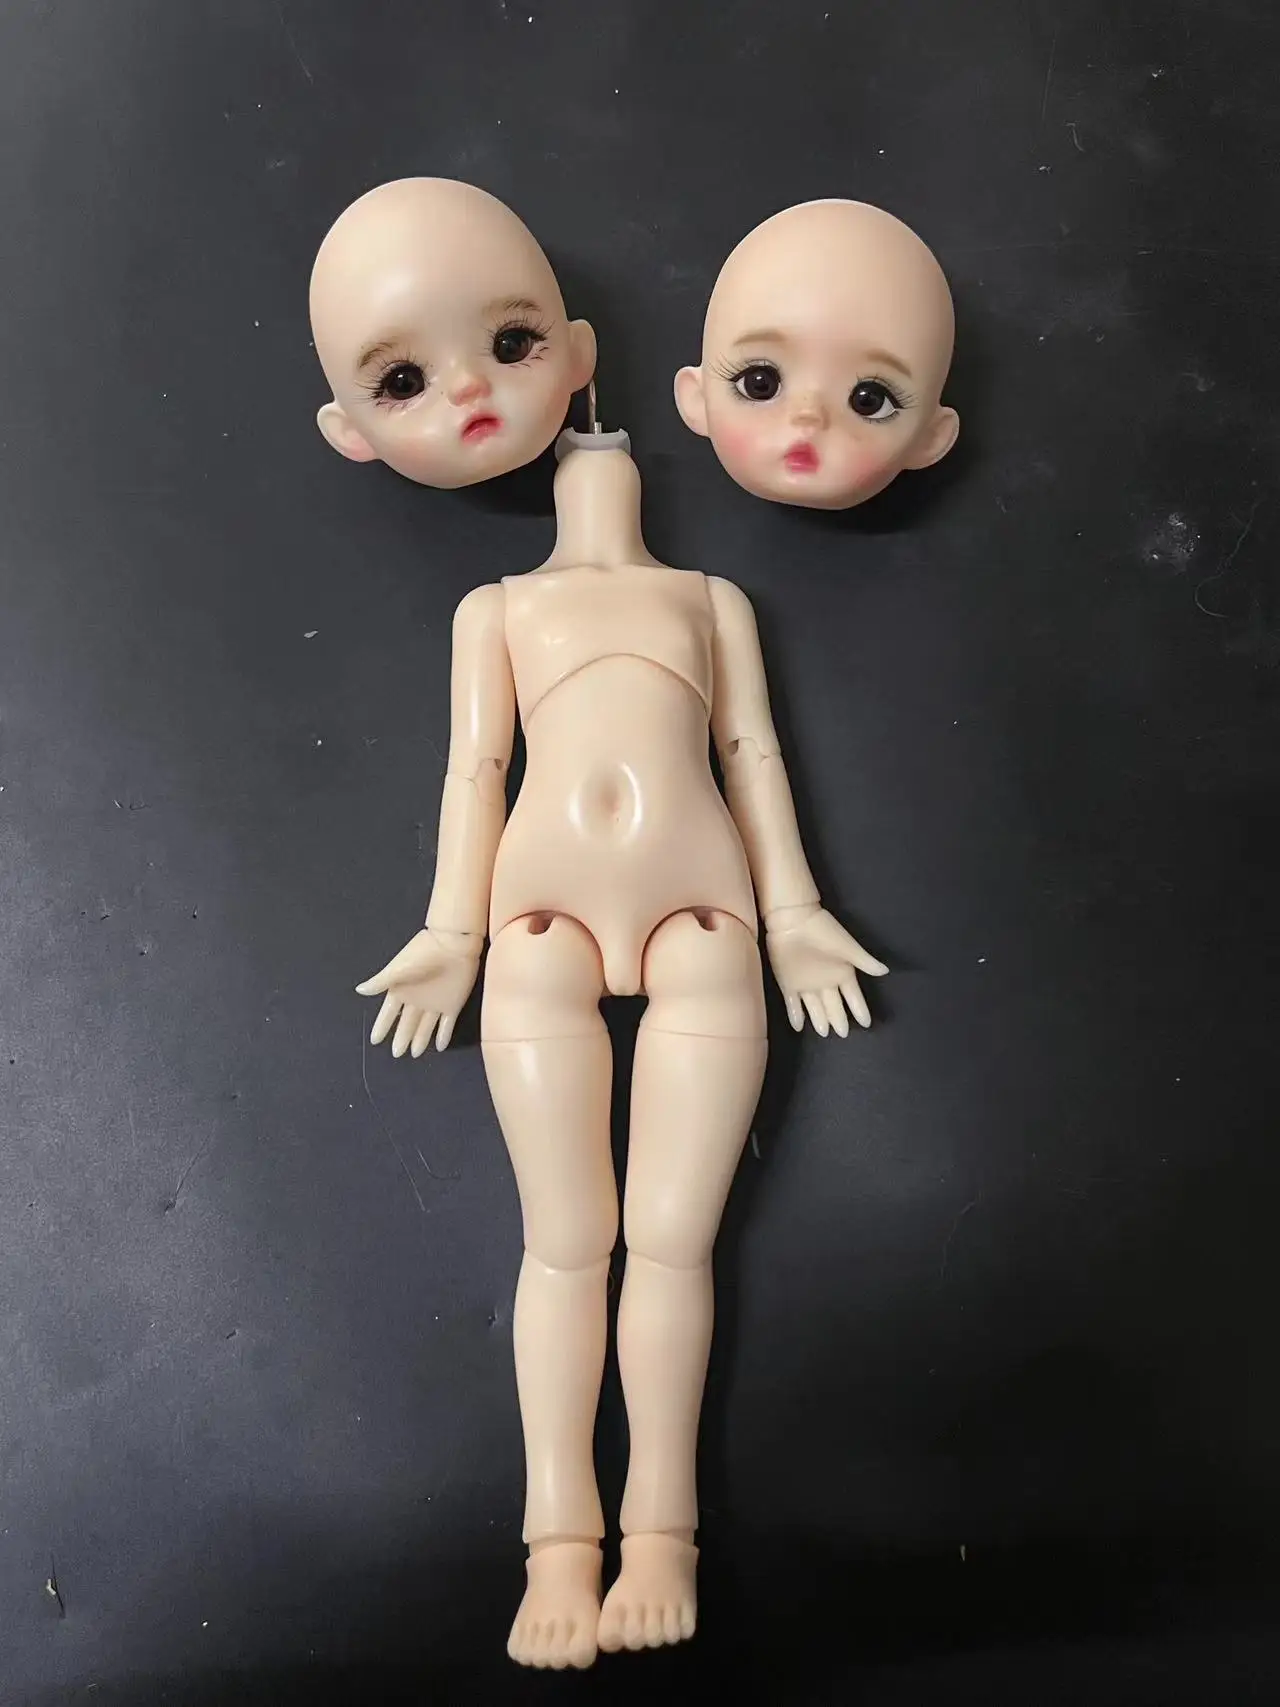 gaoshunBJD doll 1/6 1/8 dada chimu body didi zhuzhu freeshipping resin body mold present Ball-jointed dolls FOR SALE girls adult silicone mold diy doll eyes 8 sizes resin pendant mirror crafts jewelry making